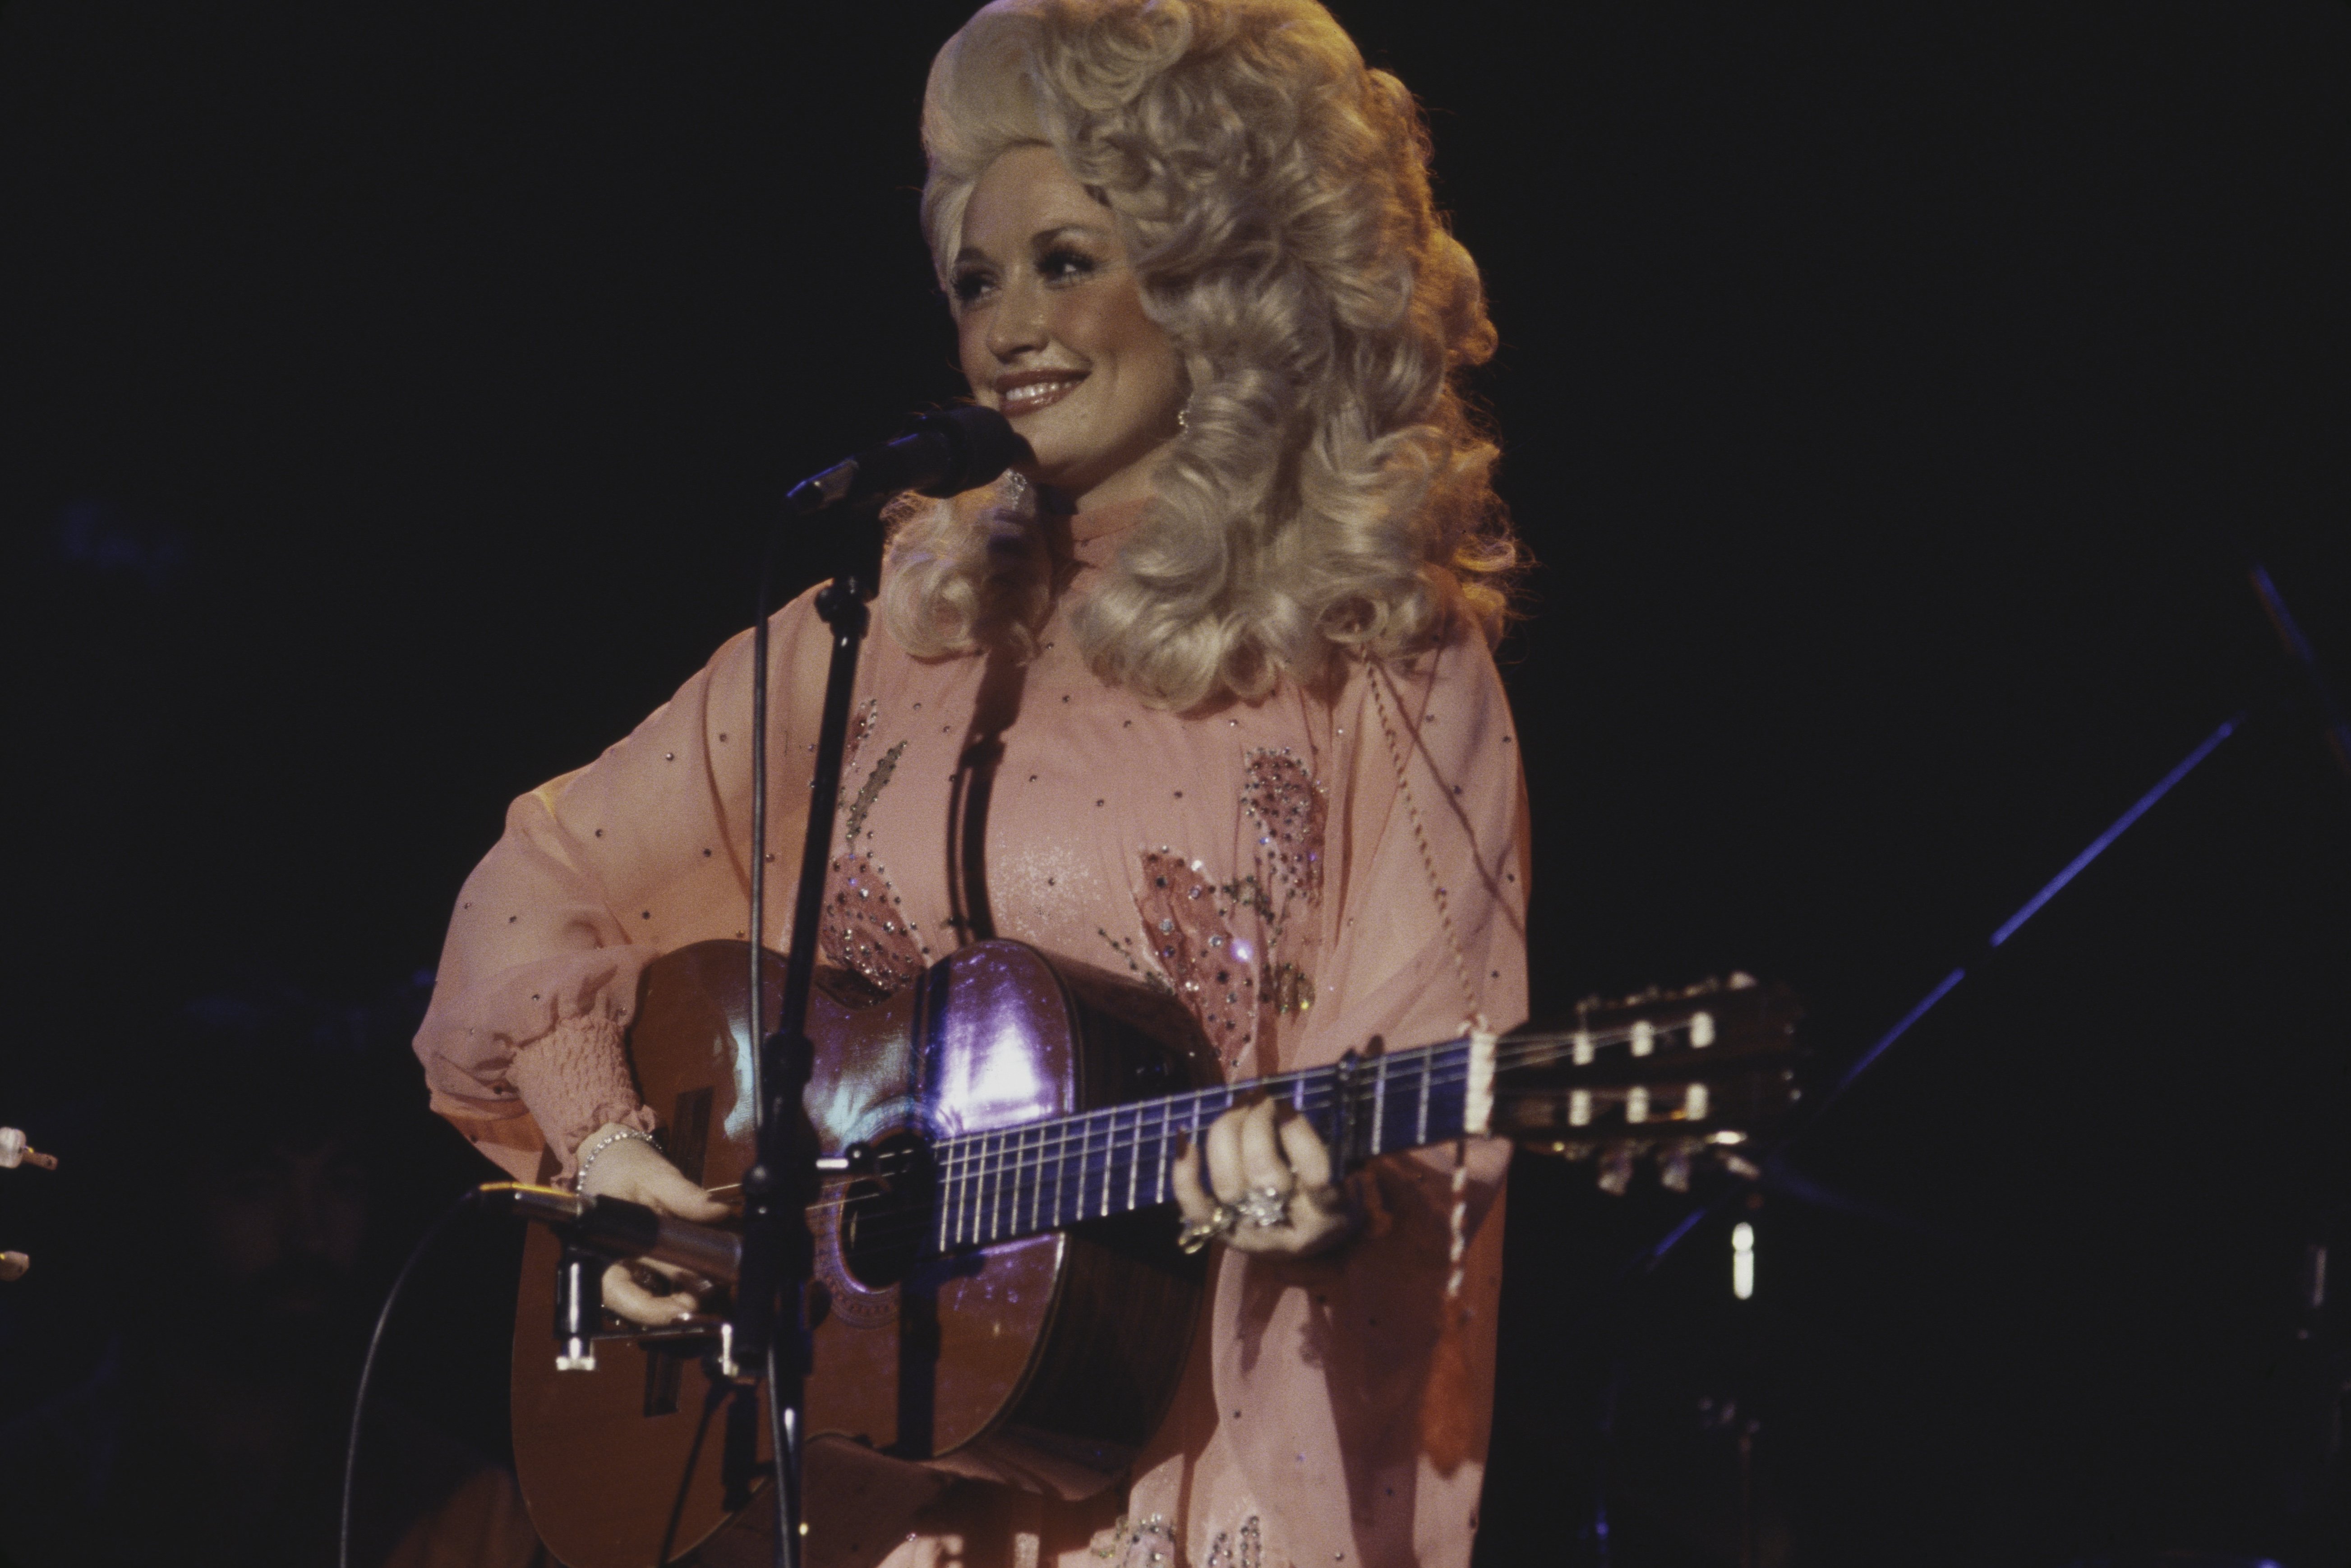 Dolly Parton performs live on stage at the Bottom Line club in New York on 11th May 1977 | Photo: GettyImages